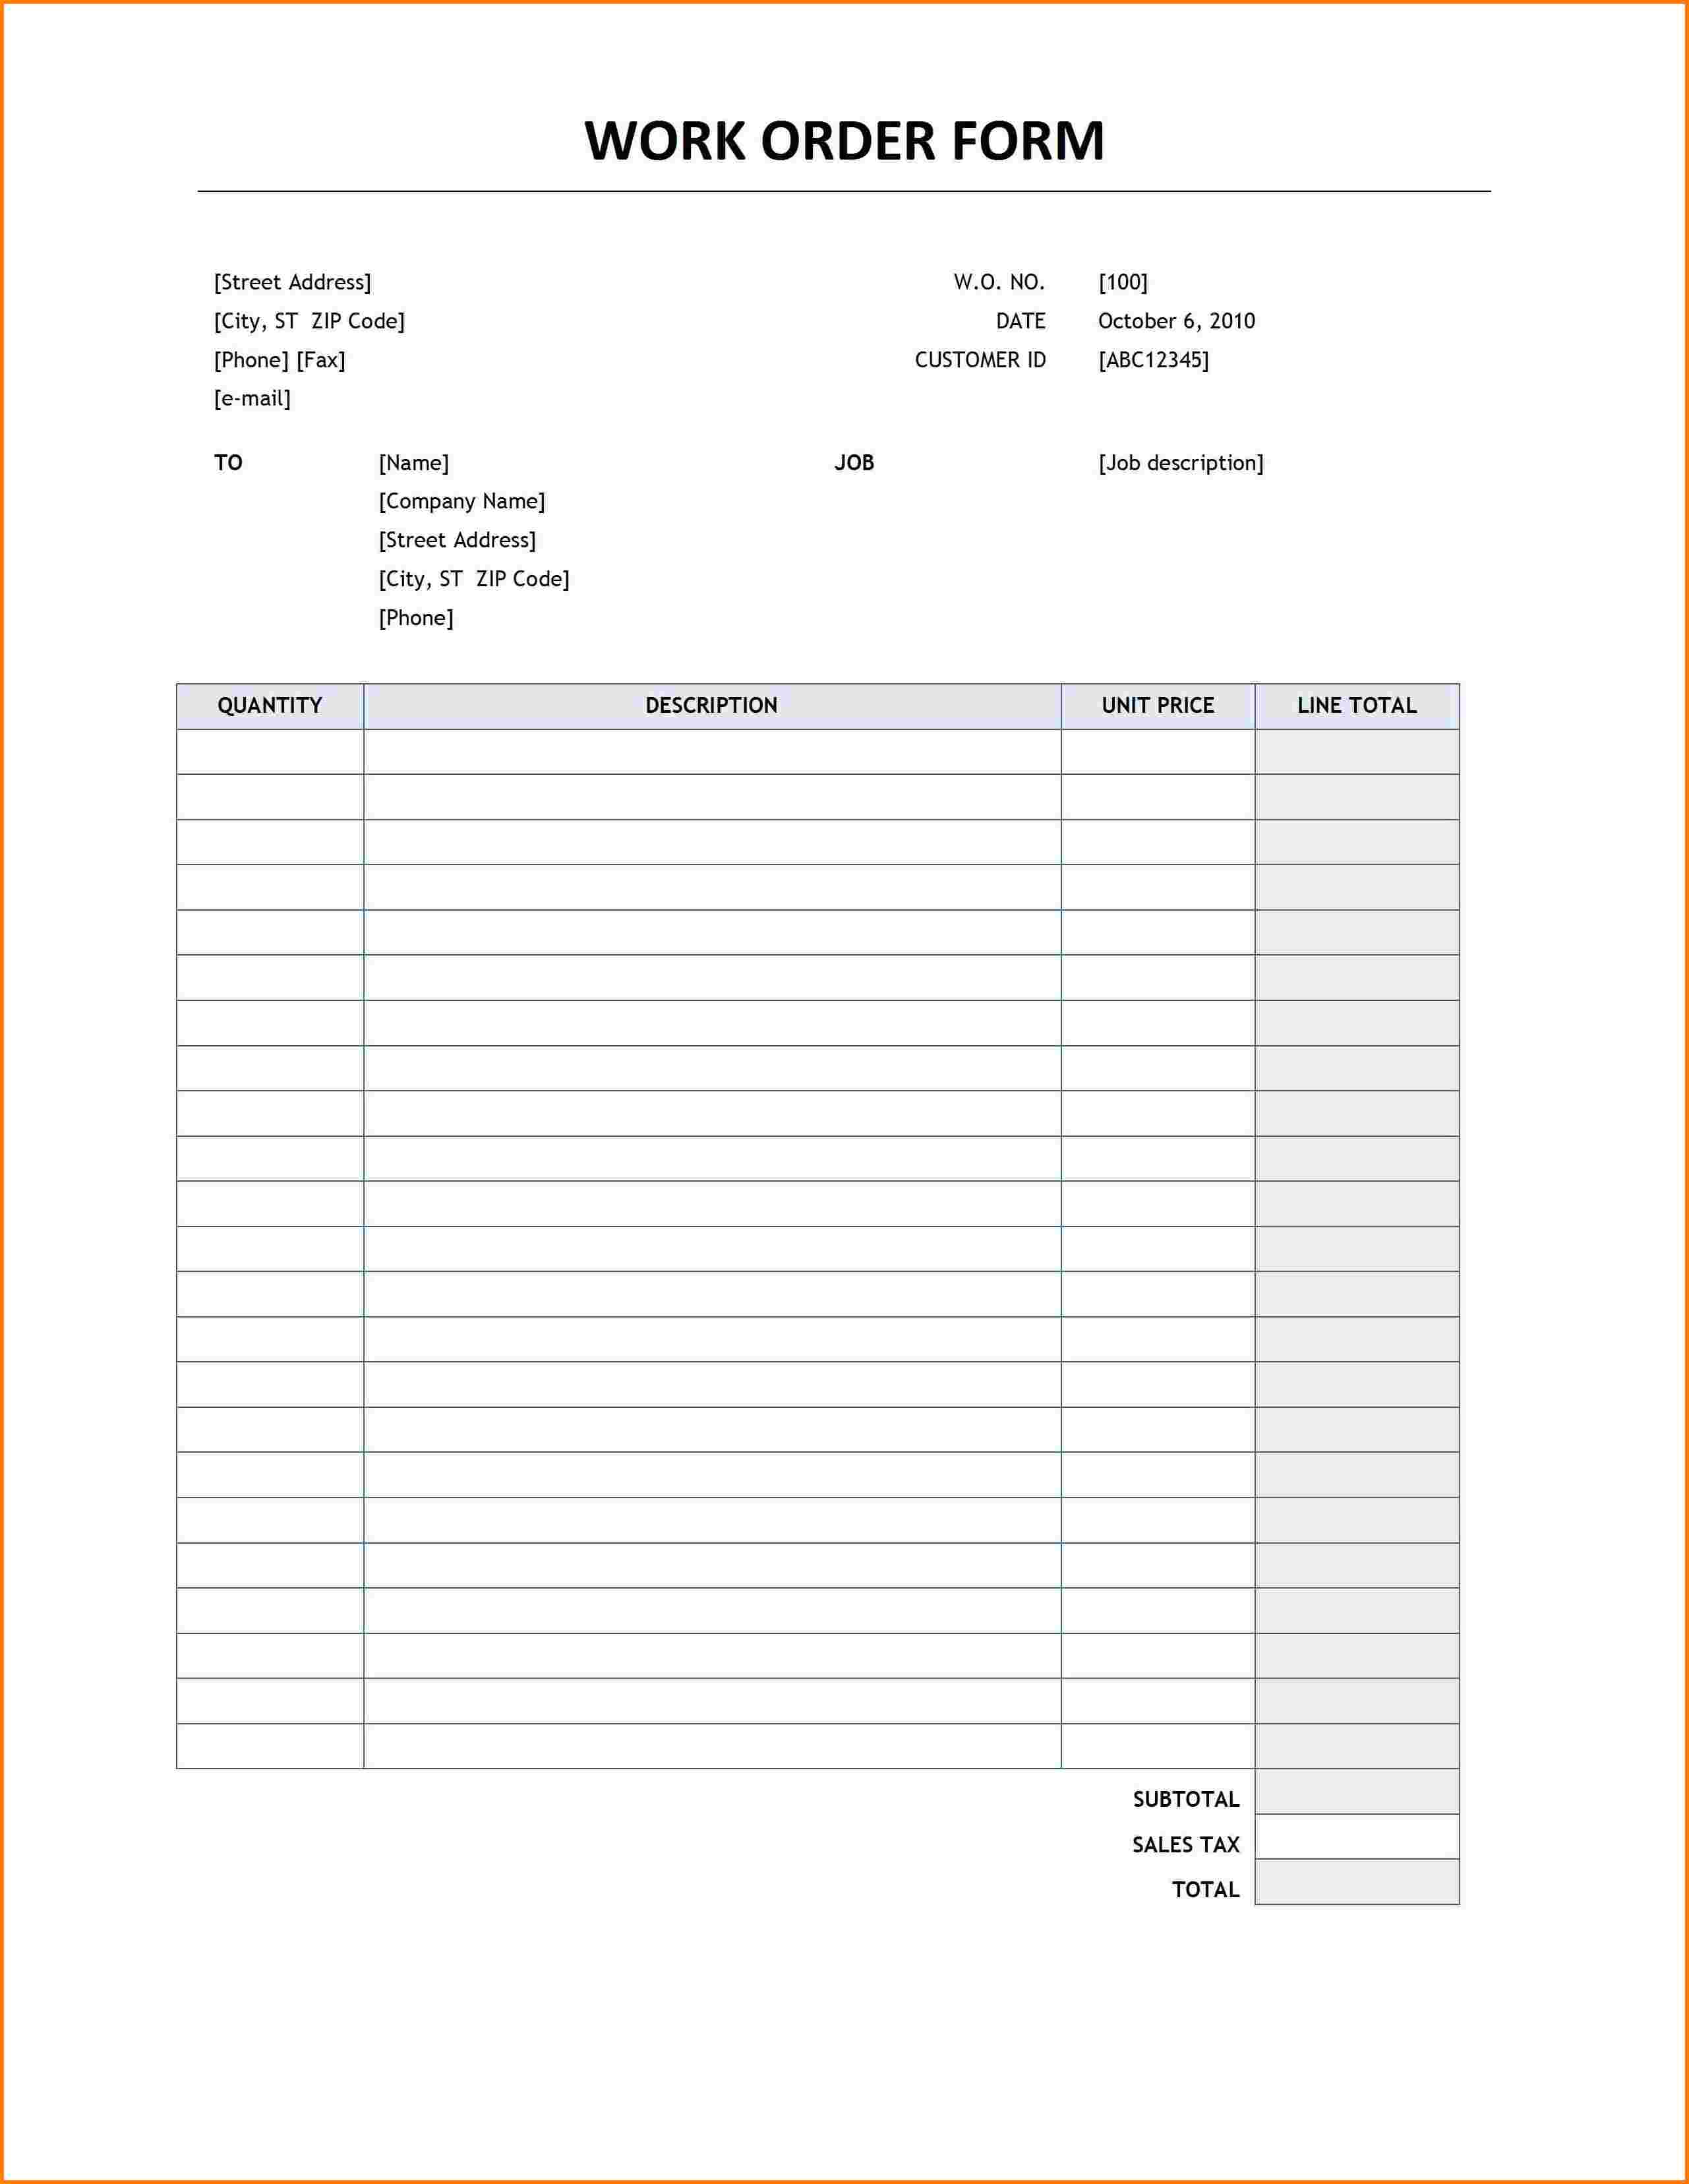 Blank Work Order Form | charlotte clergy coalition